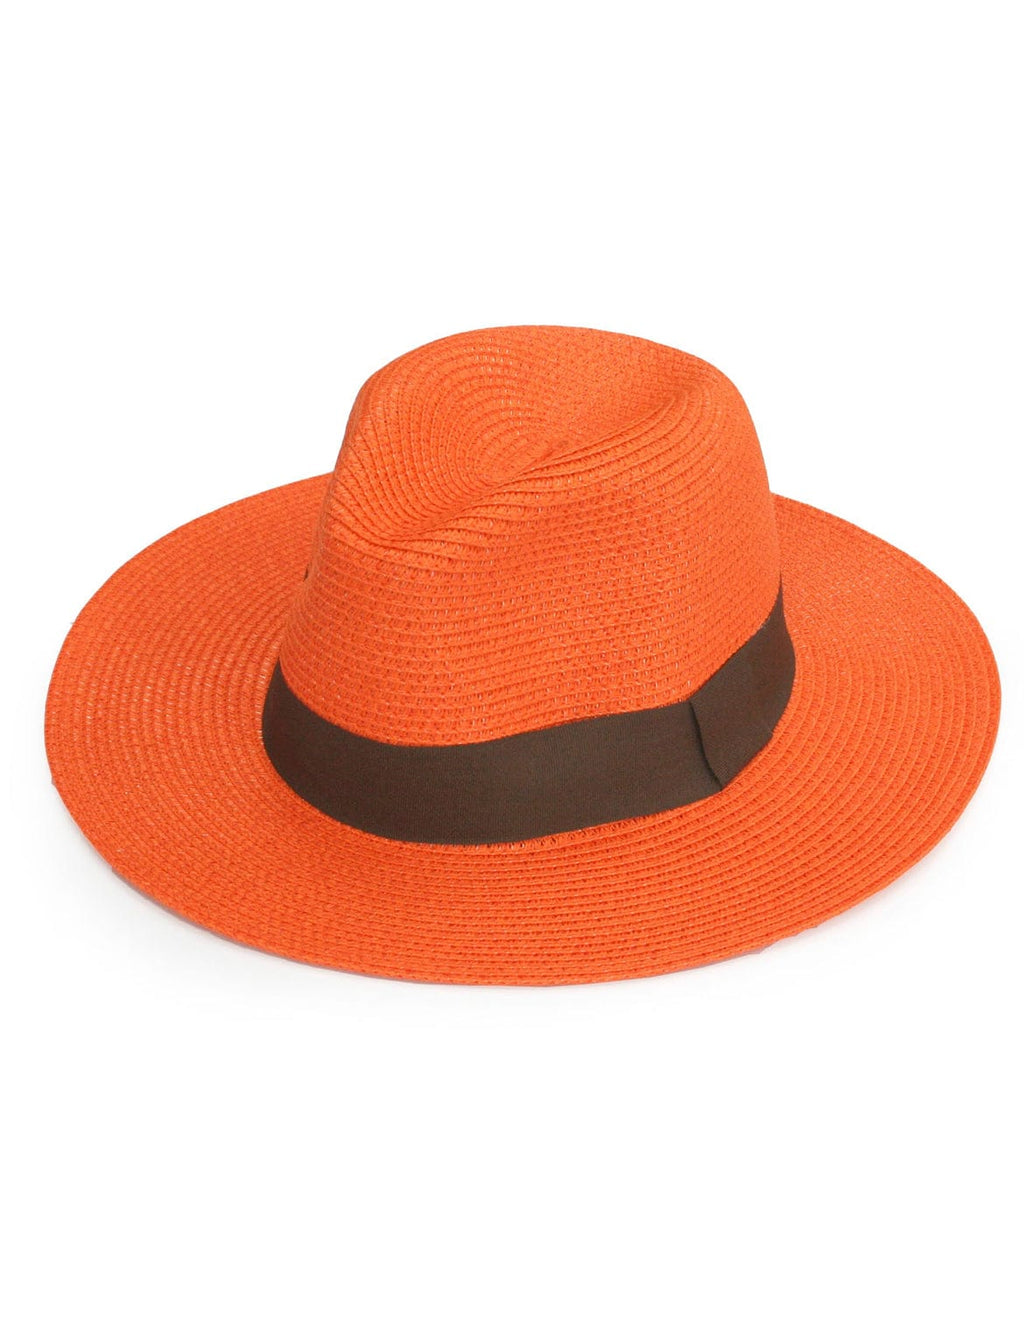 lusciousscarves Hats Orange Panama Style Sun Hat ,foldable and Rollable